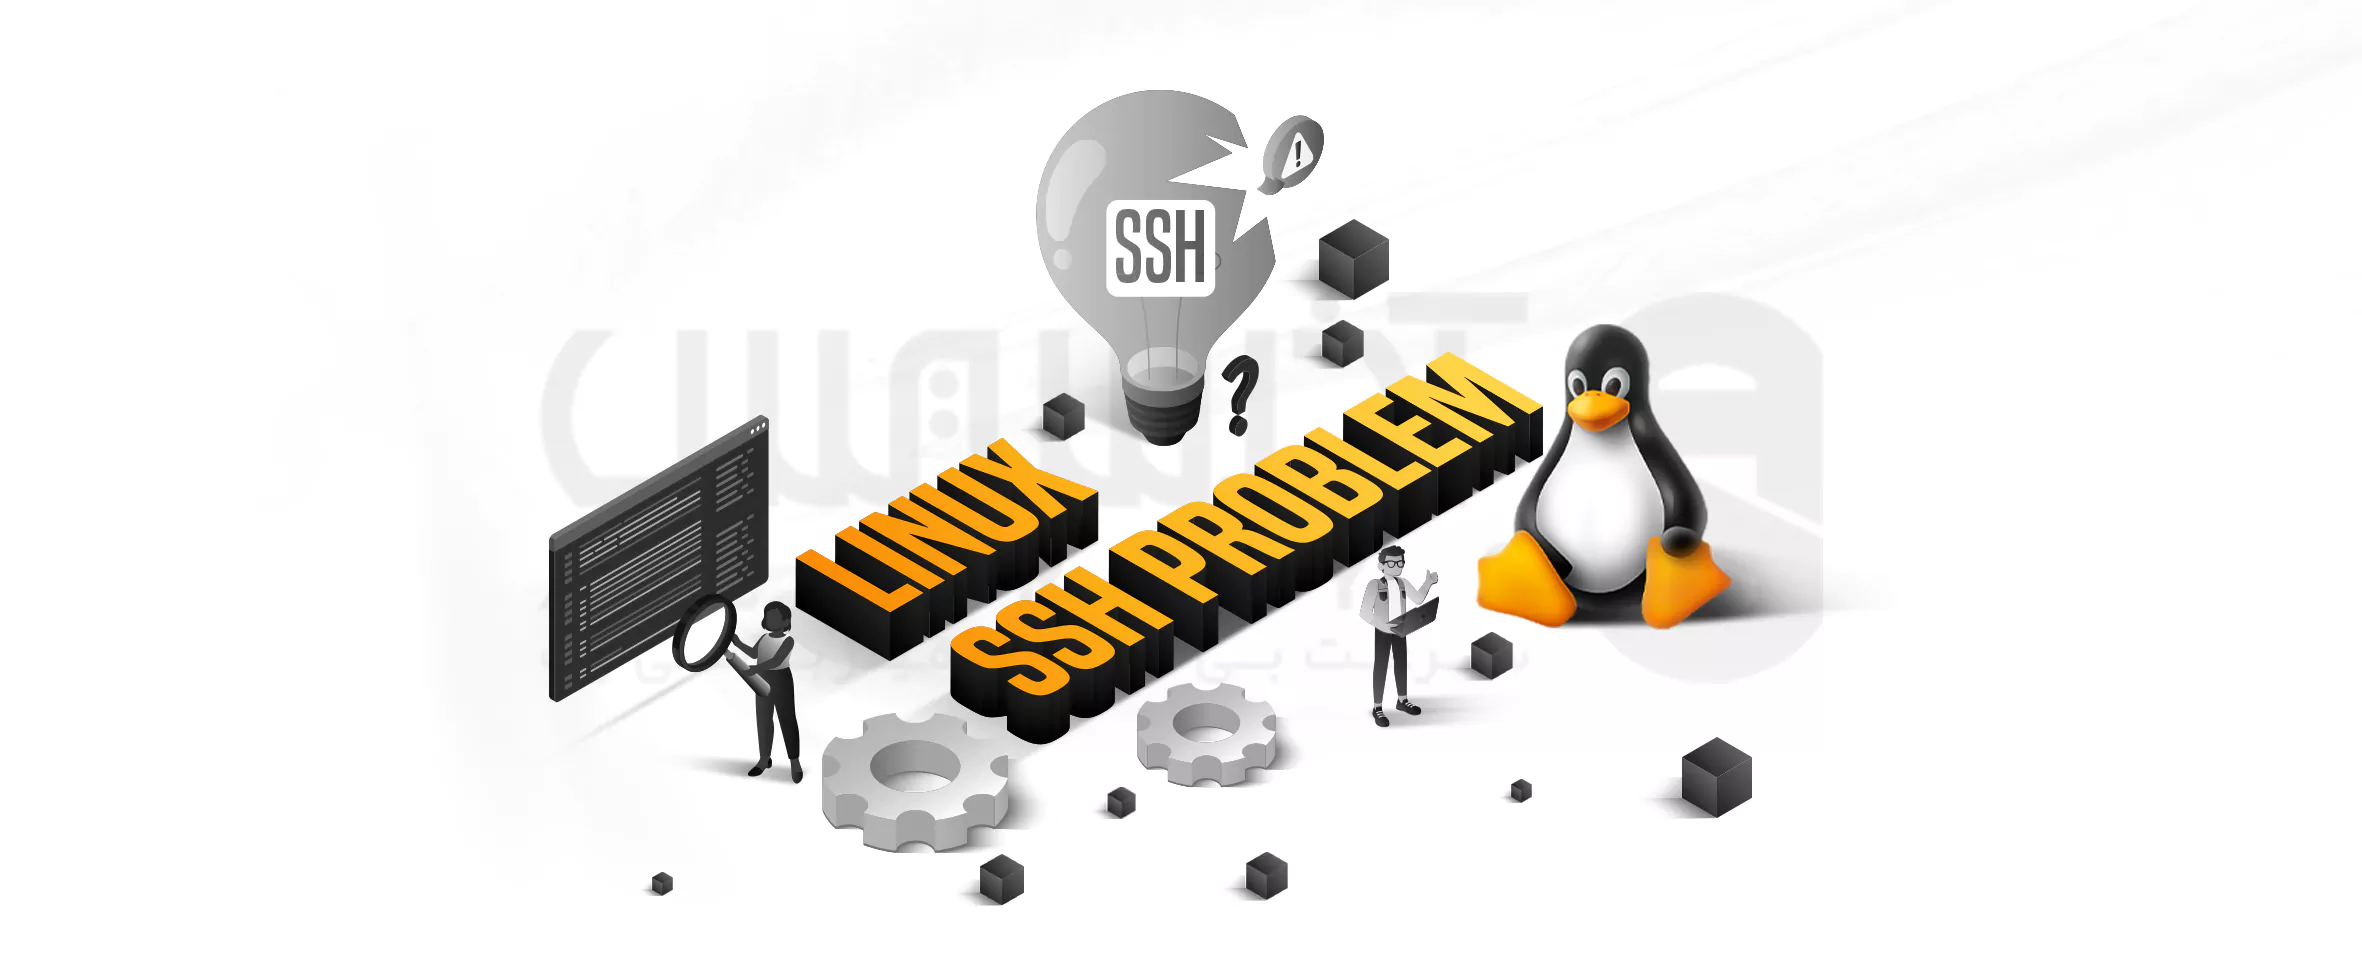 How to troubleshoot SSH problems on